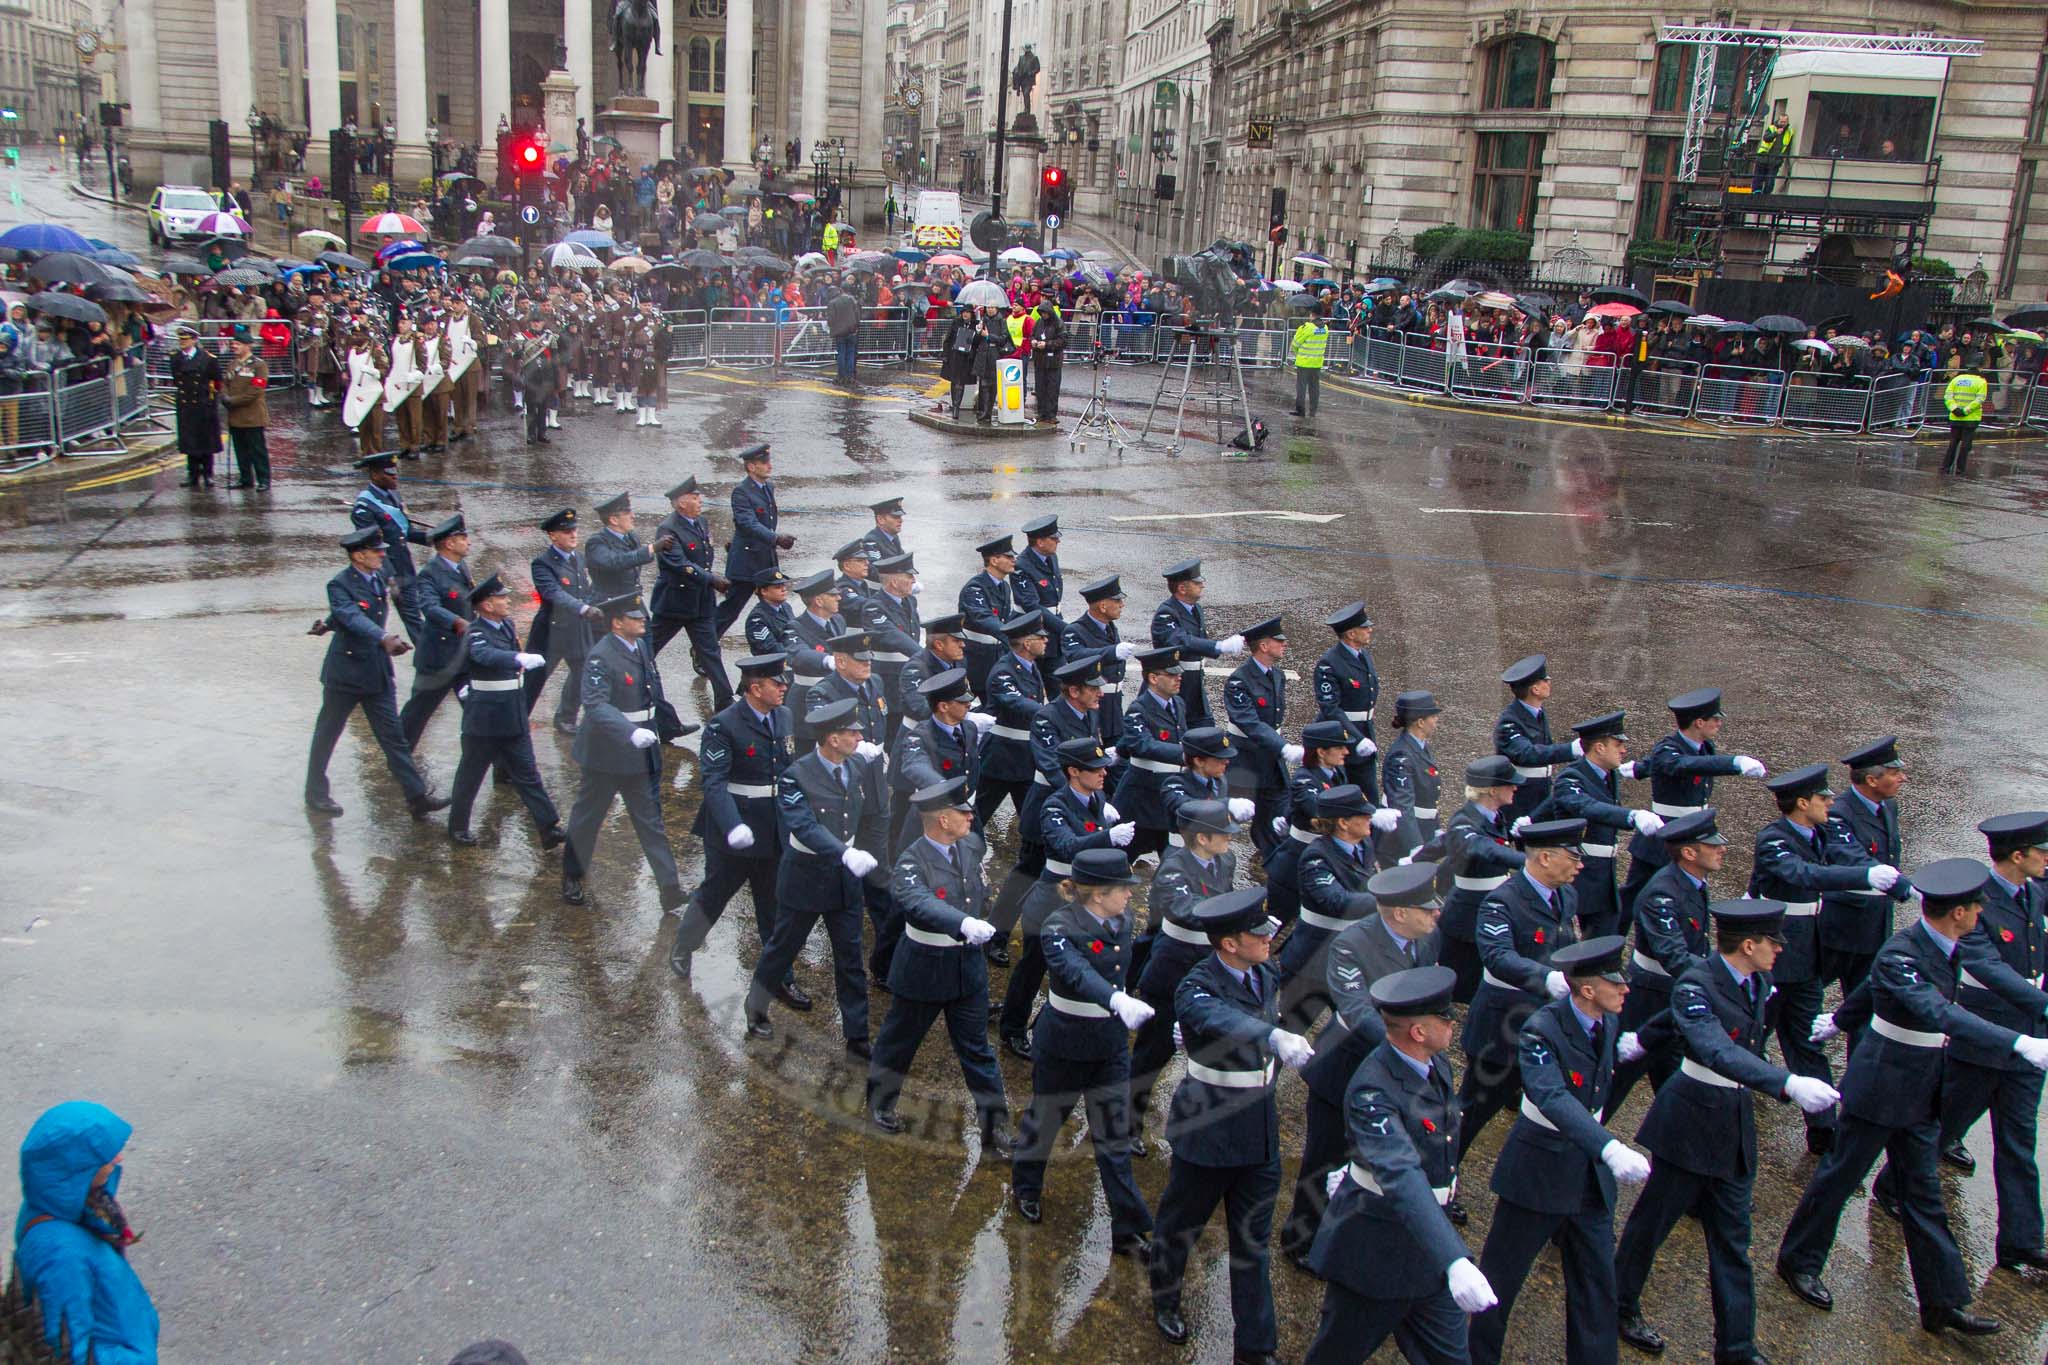 Lord Mayor's Show 2013: 16-Royal Air Force- marching contingent includes Regular and Reserve personnel..
Press stand opposite Mansion House, City of London,
London,
Greater London,
United Kingdom,
on 09 November 2013 at 11:08, image #298